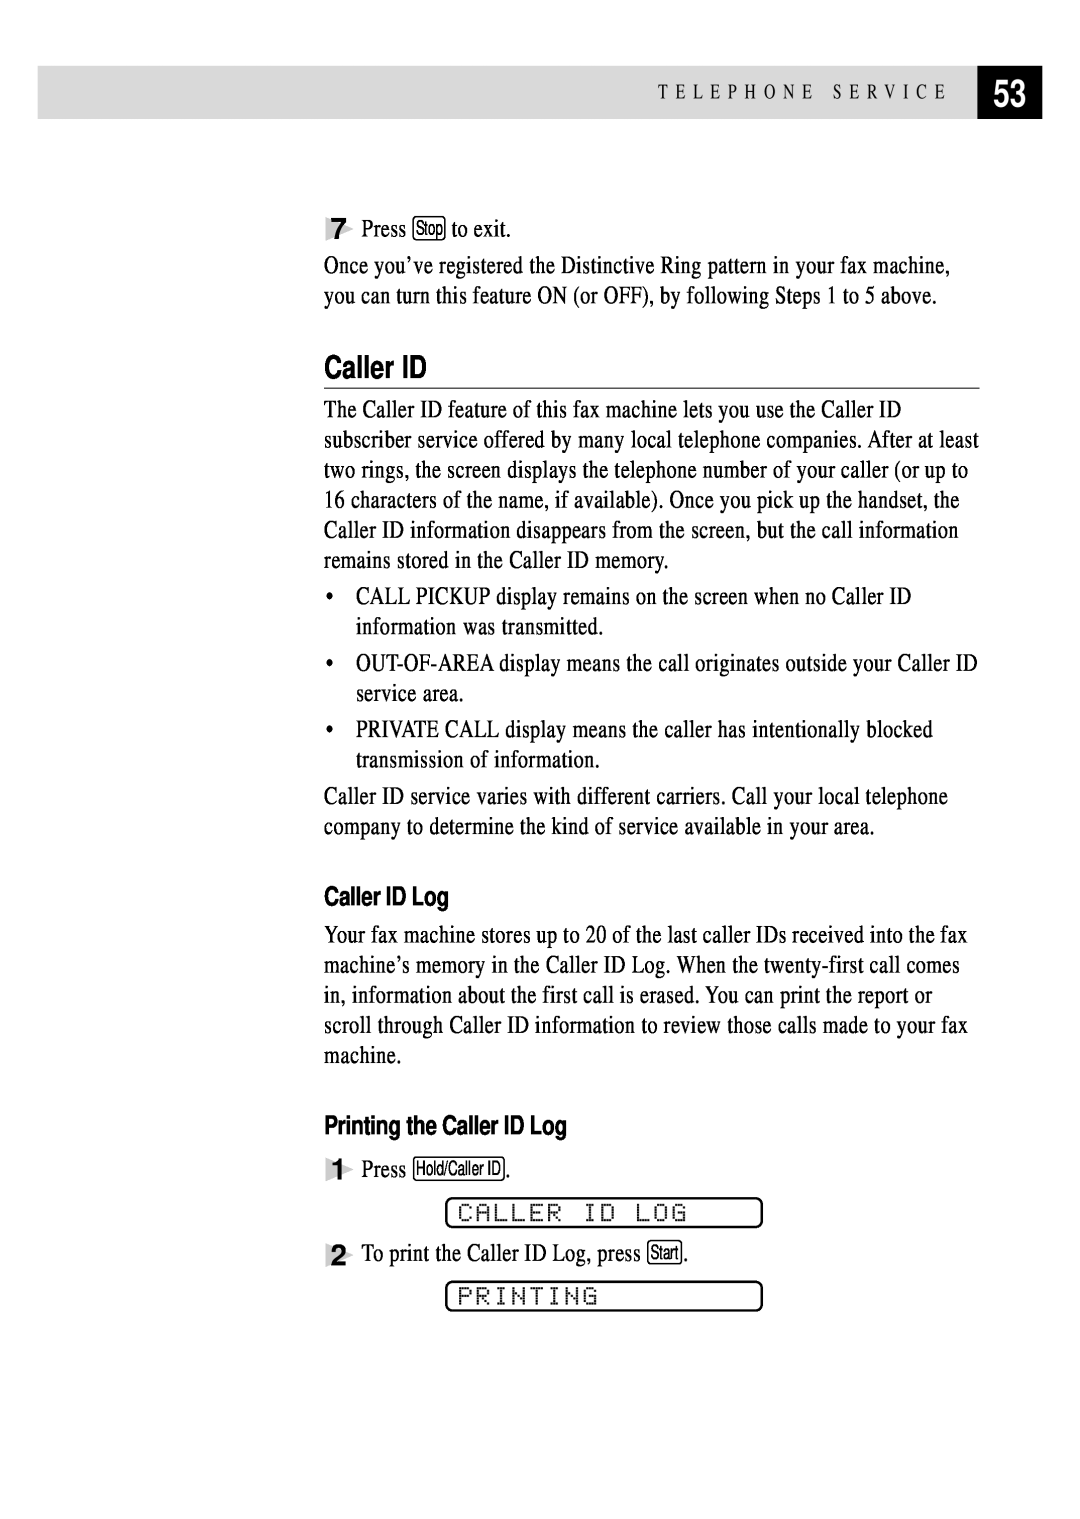 Brother FAX 255 owner manual Caller Id Log, Printing the Caller ID Log 